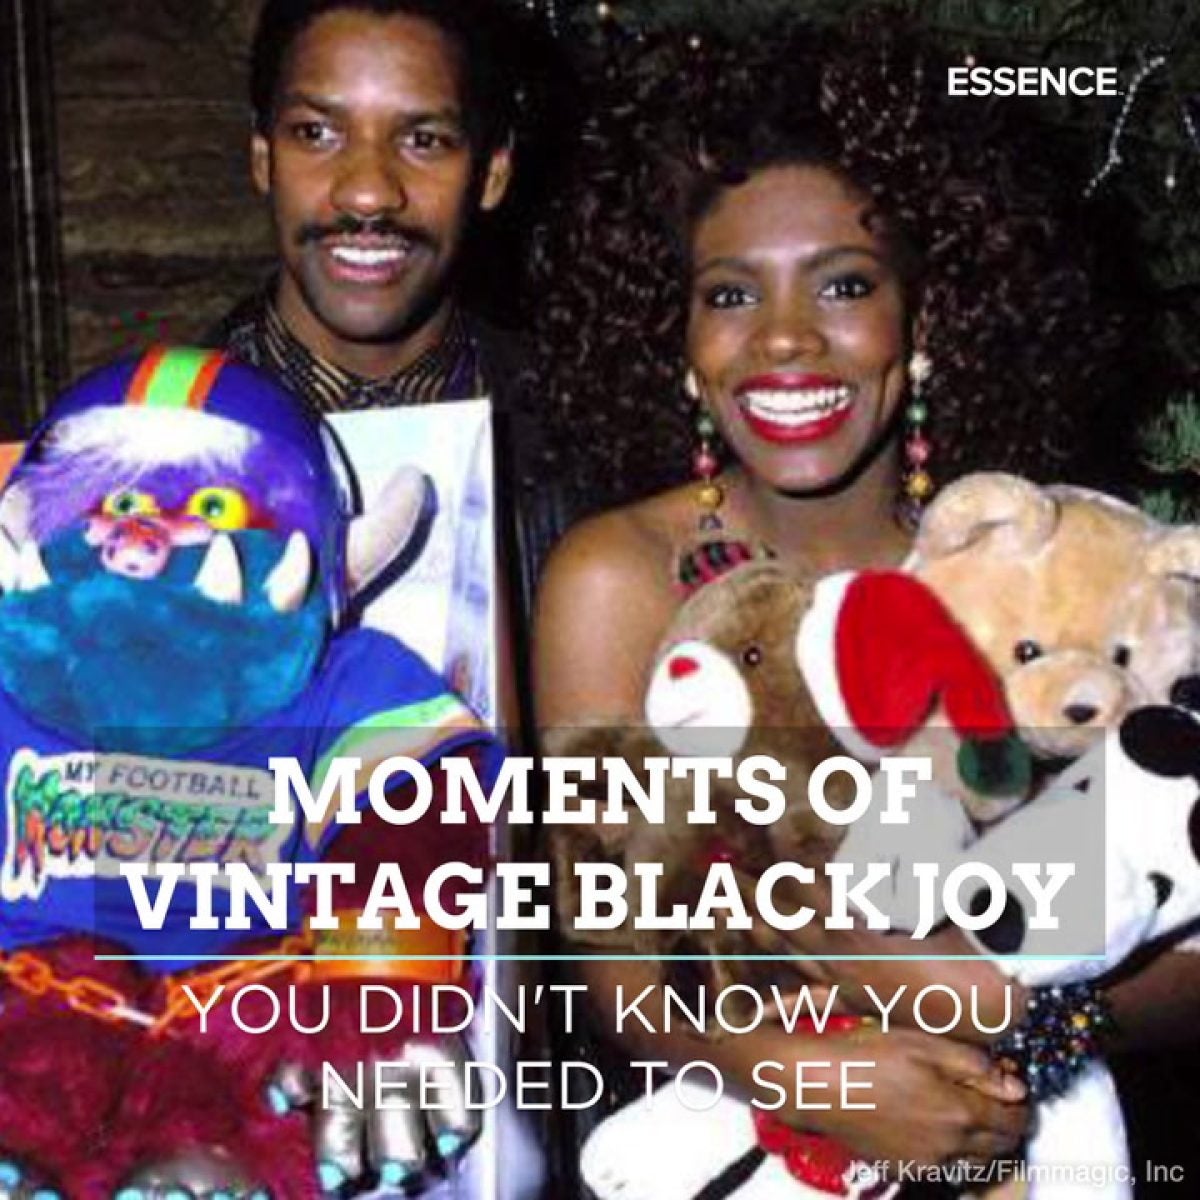 In My Feed | Moments of Vintage Black Joy